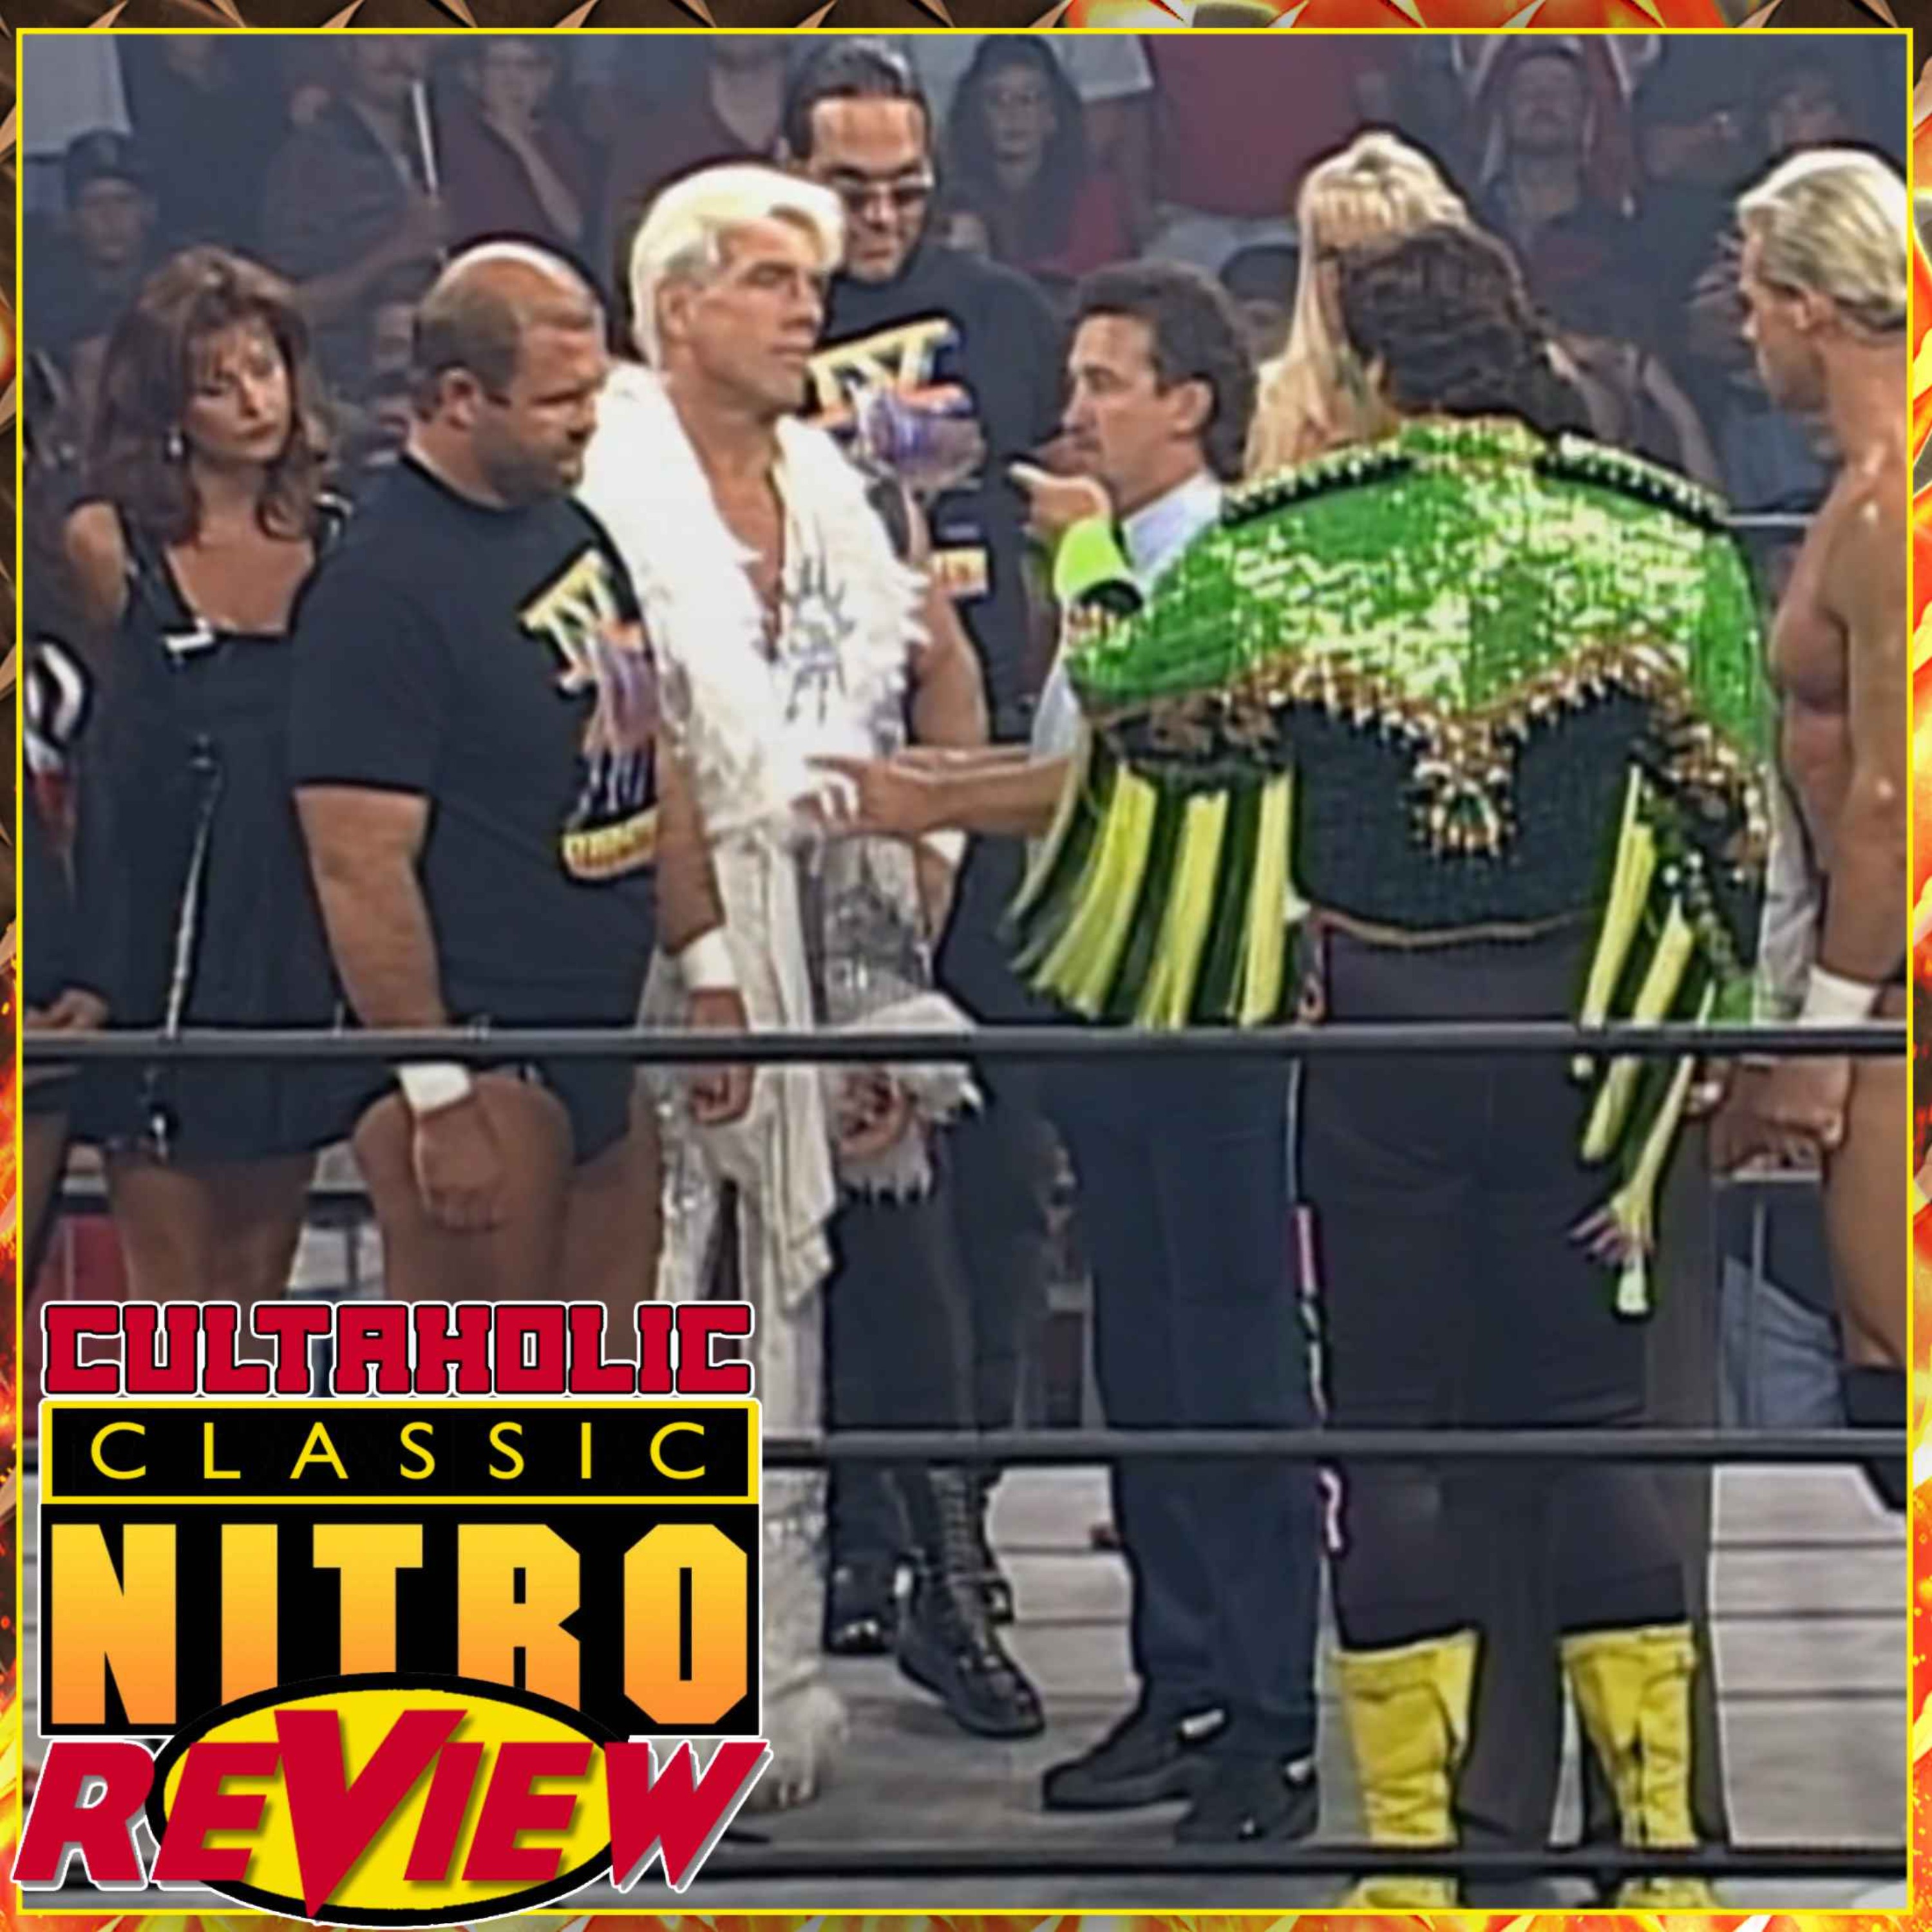 WCW Nitro #49: An Unholy WCW Alliance Is Formed To Battle The nWo! | CULTAHOLIC CLASSIC NITRO REVIEW